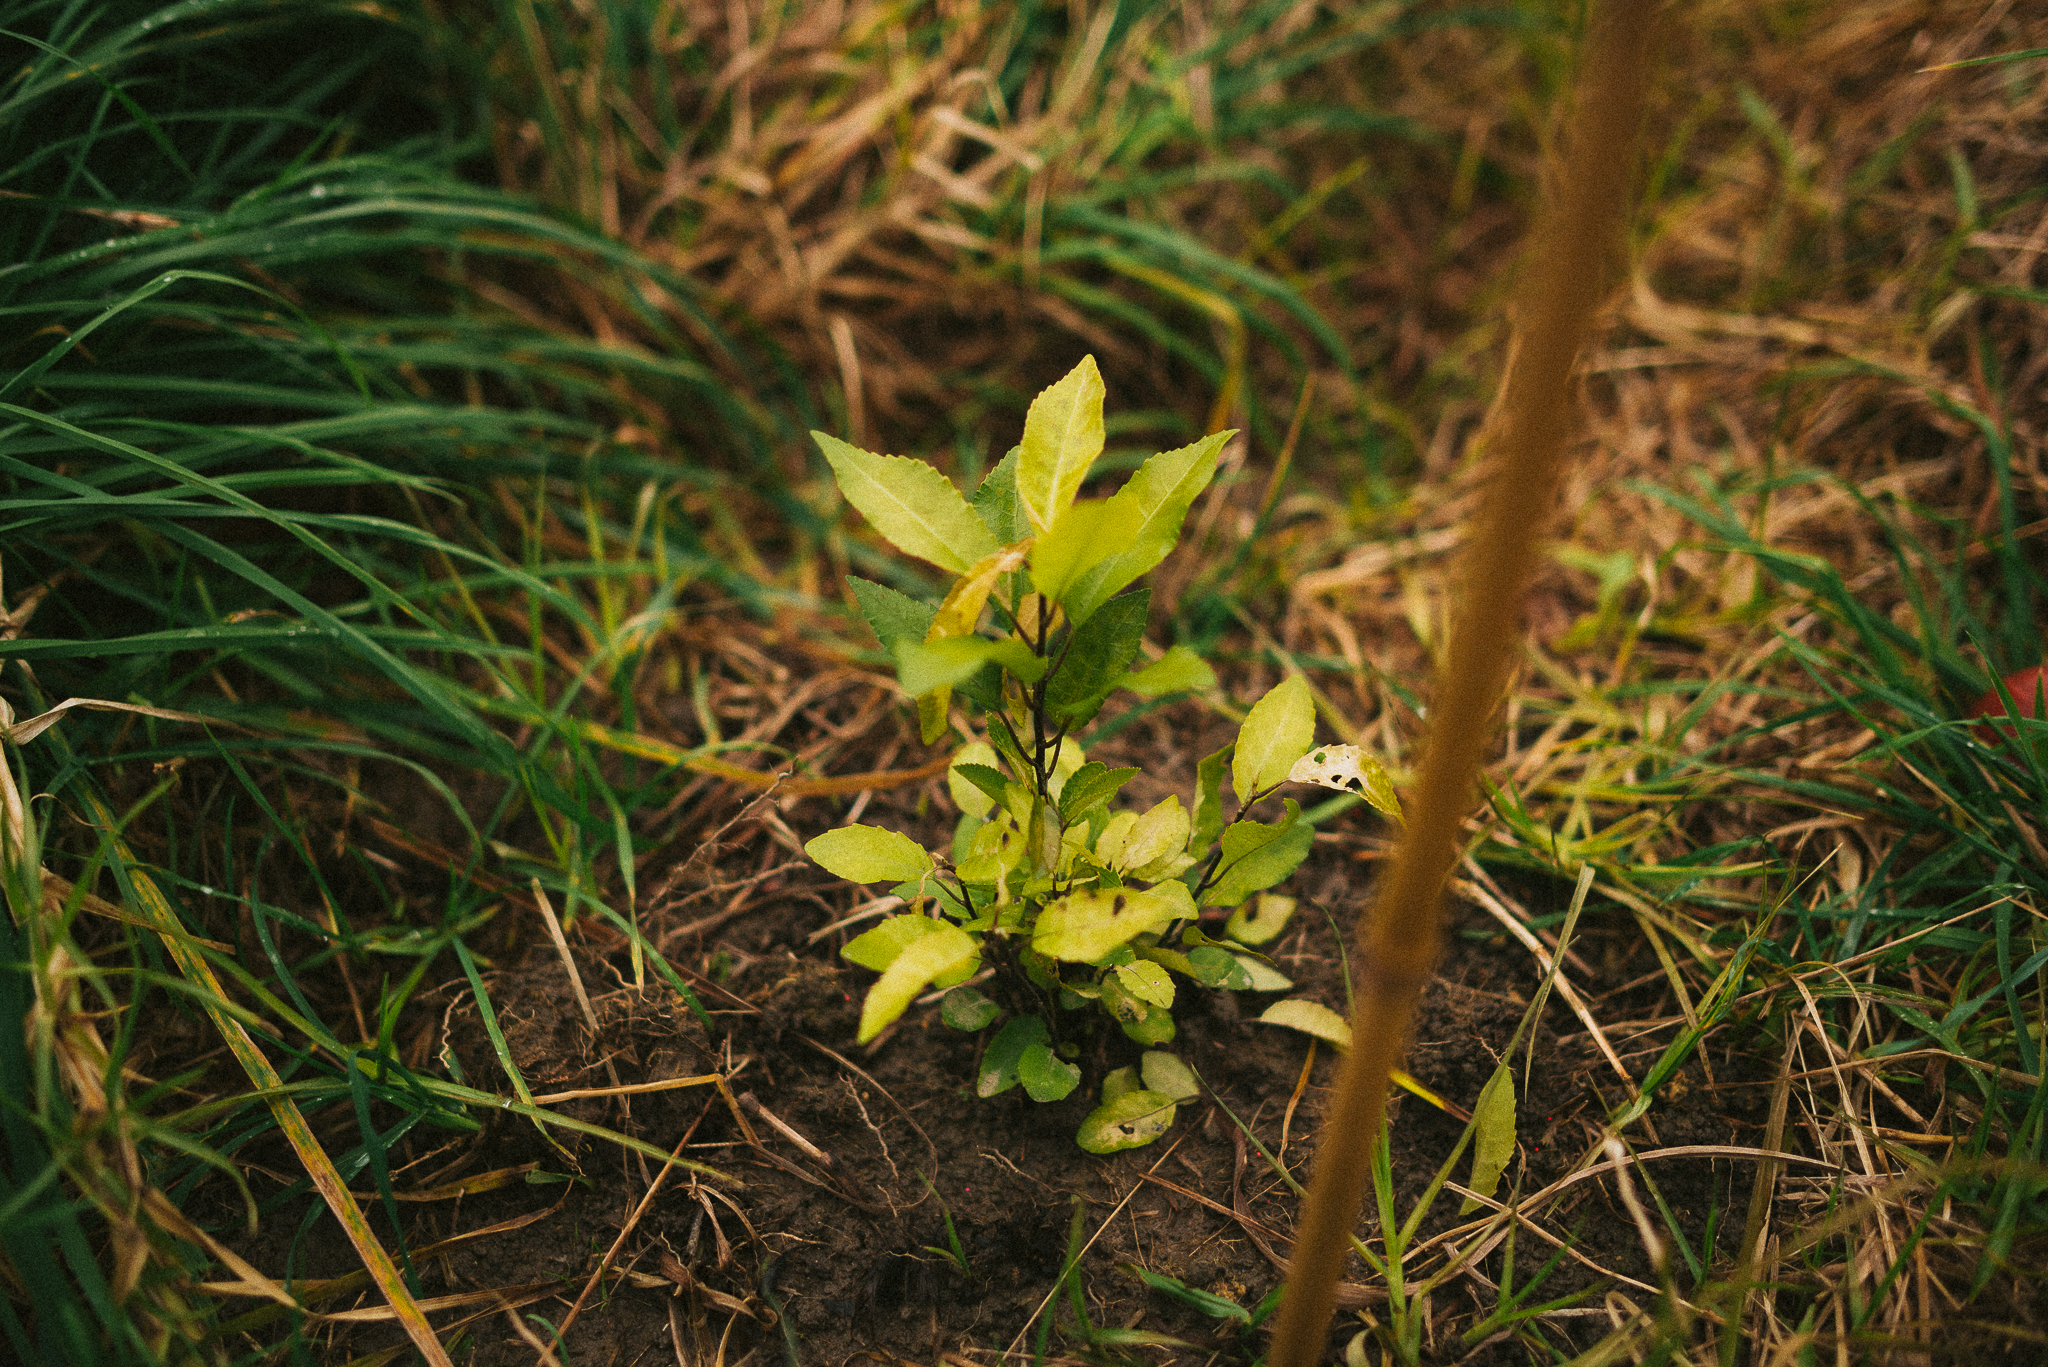 Close up of recently planted seedling alongside a wooden stake